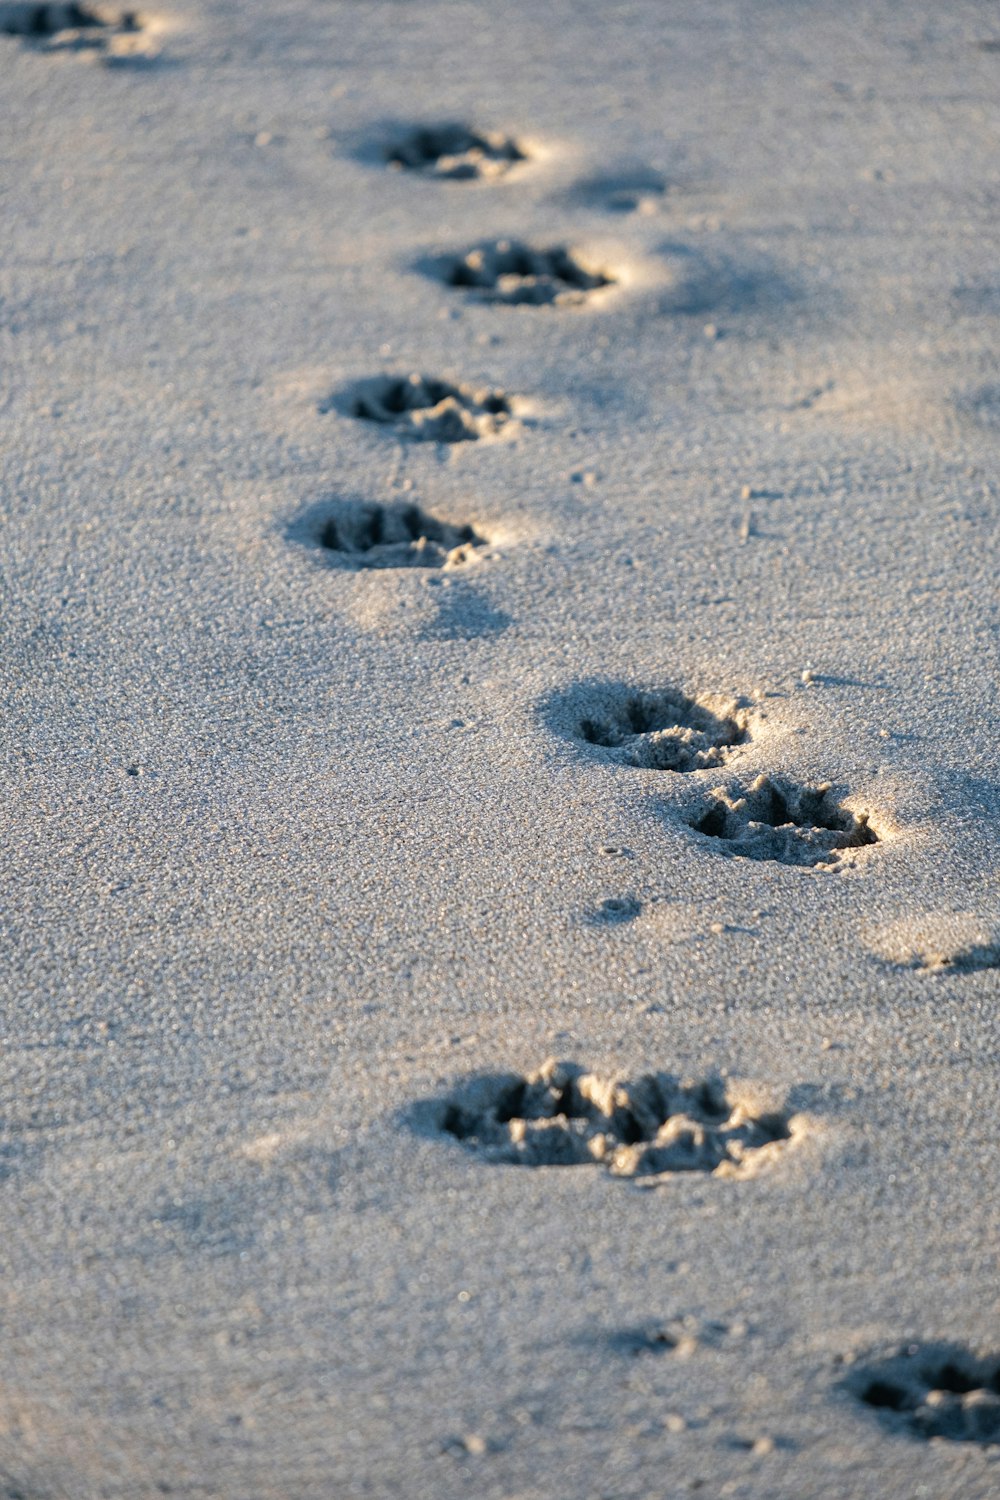 a dog paw prints in the snow